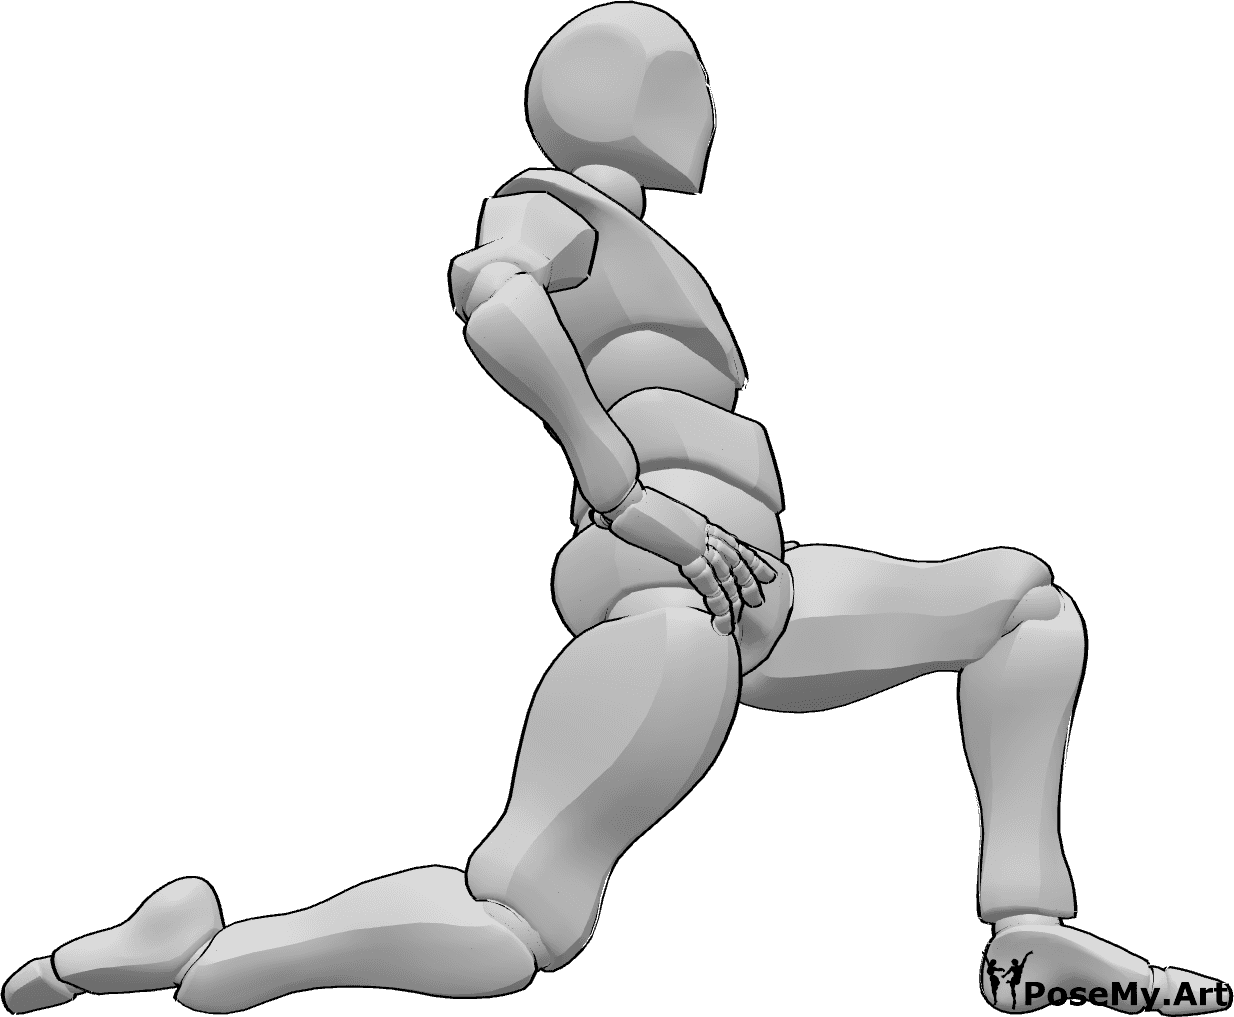 Pose Reference- Kneeling stretching pose - Male is kneeling with his hands on hips, stretching his trunk and legs